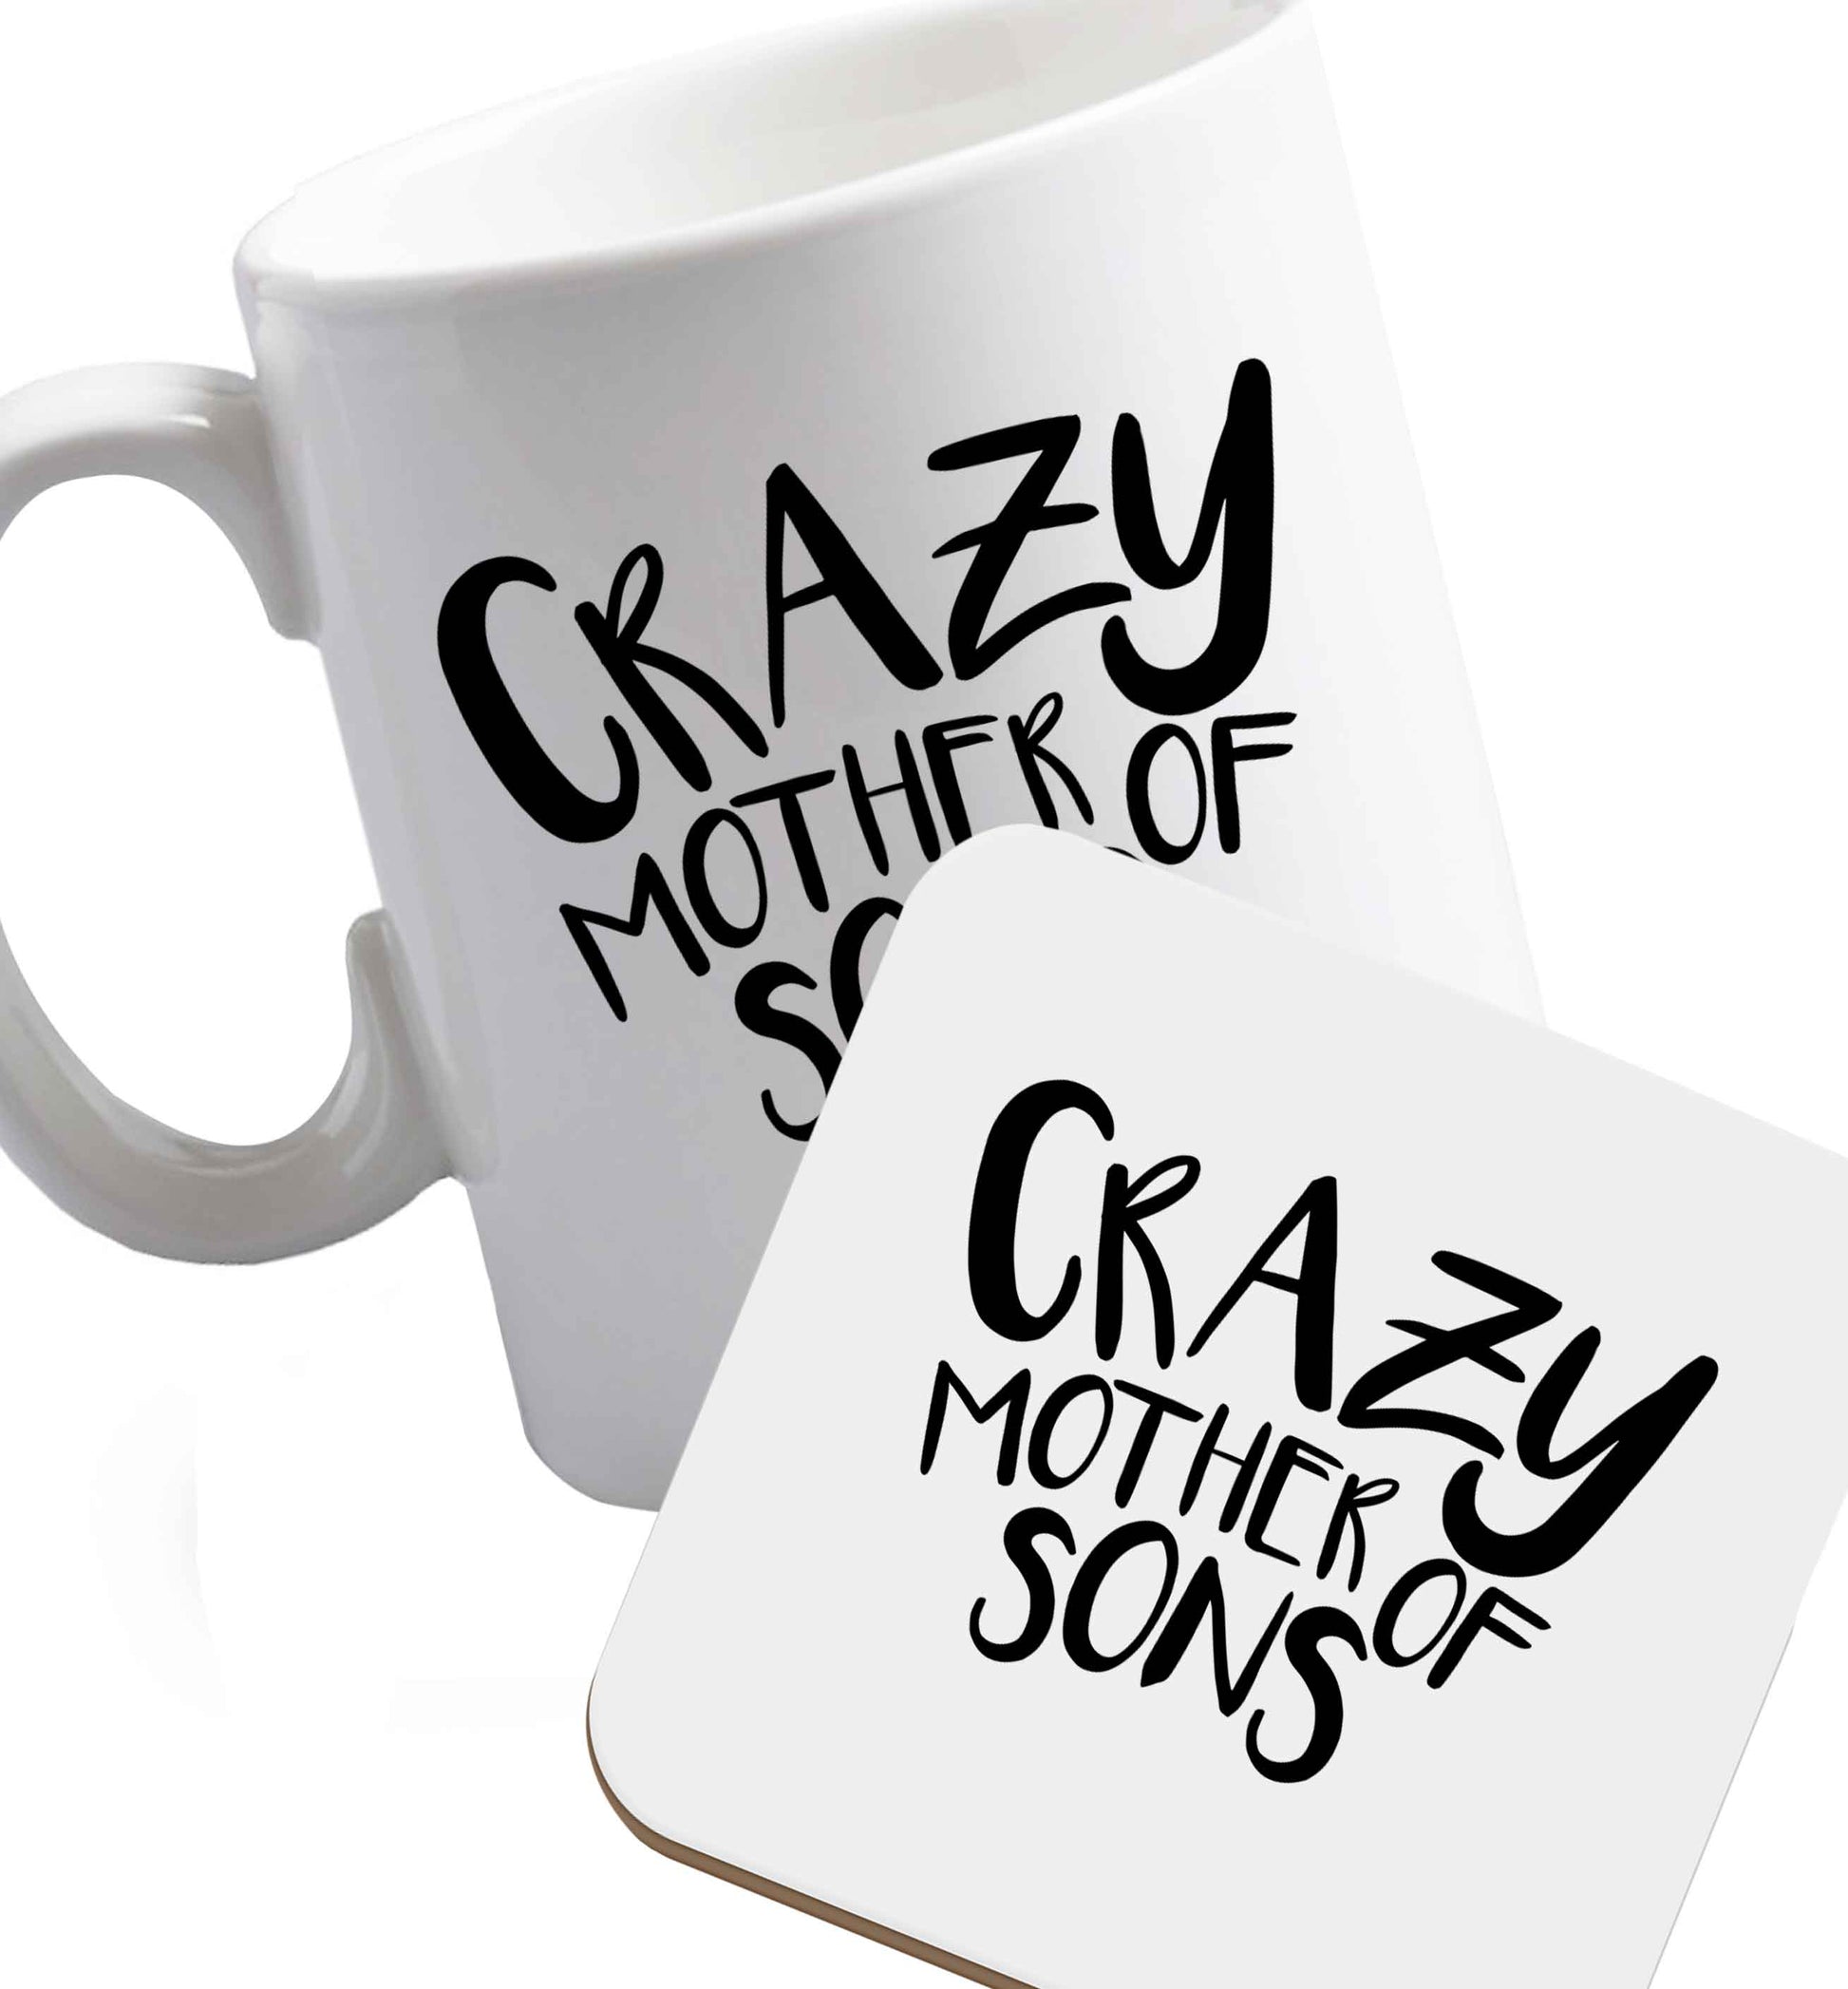 10 oz Crazy mother of sons ceramic mug and coaster set right handed